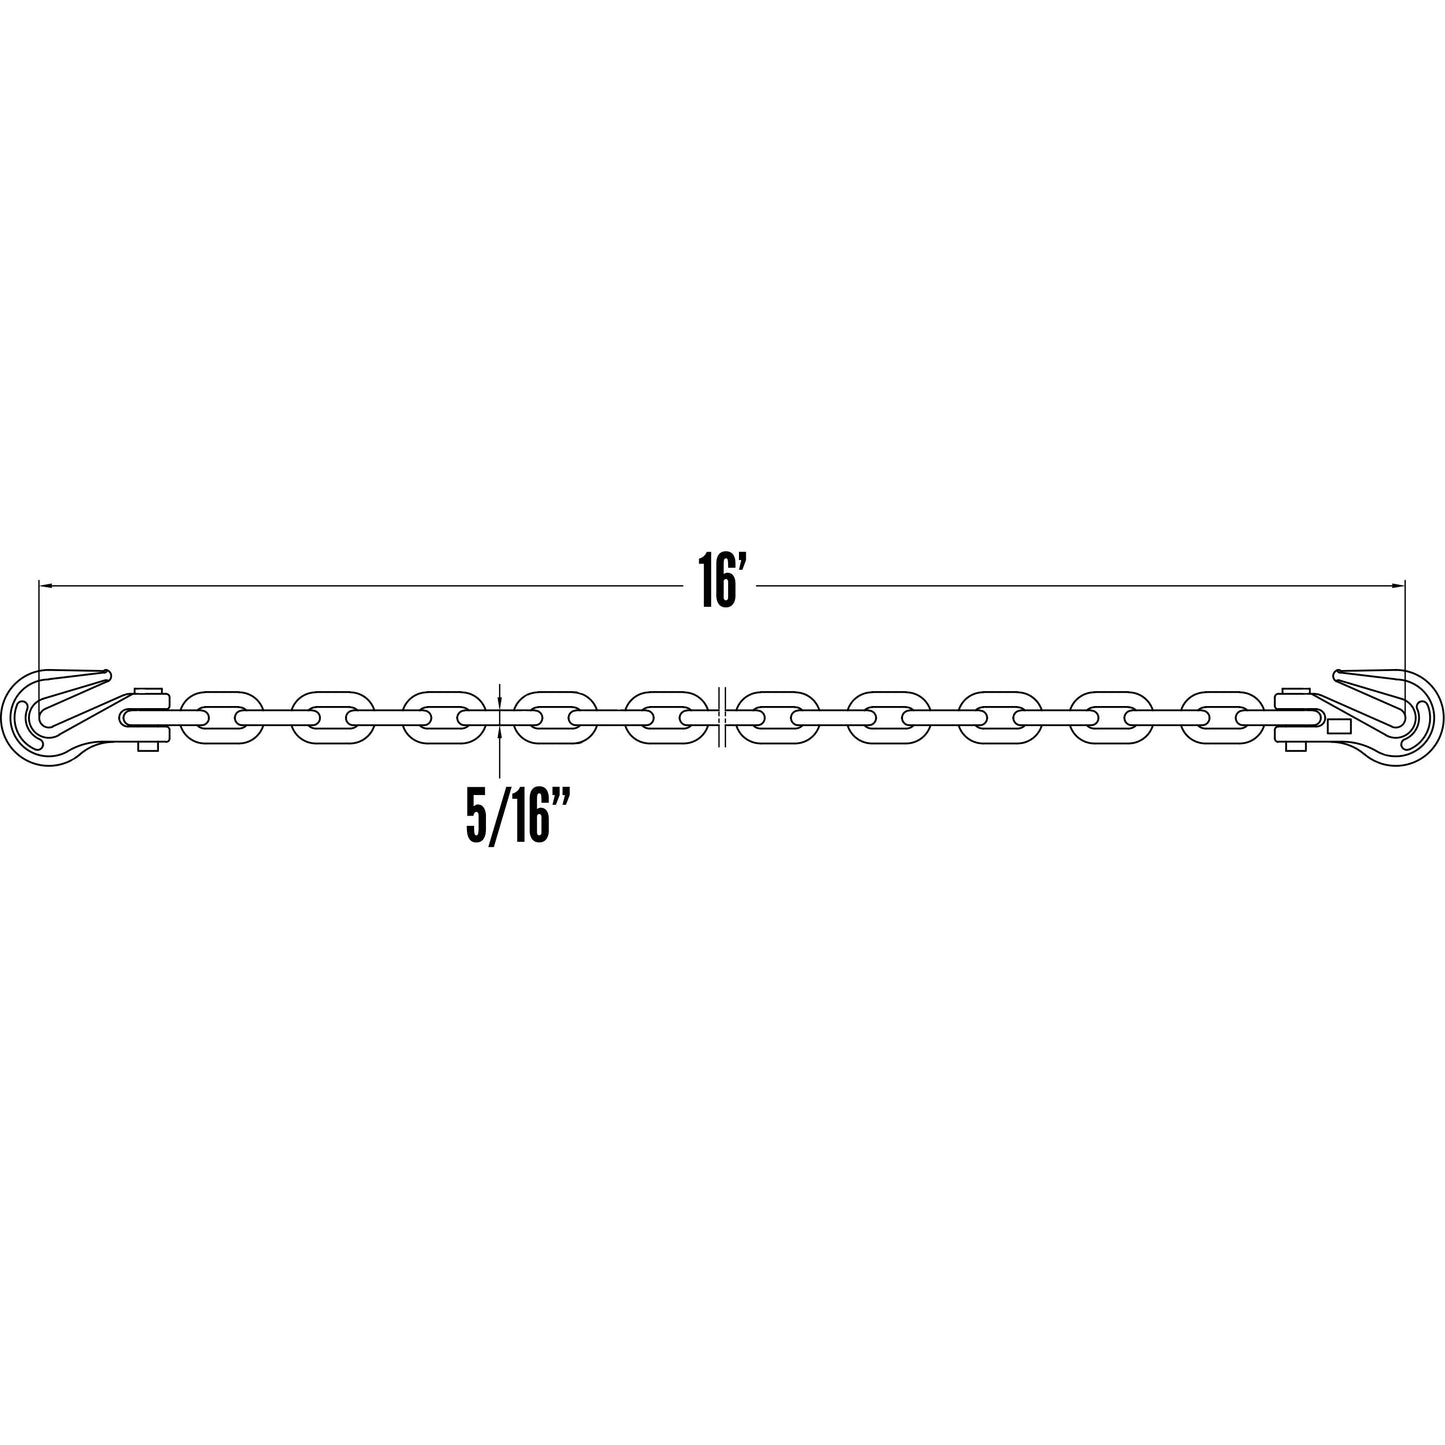 Grade 70 516 inch x 16 foot CM Chain and Binder Kit image 6 of 9